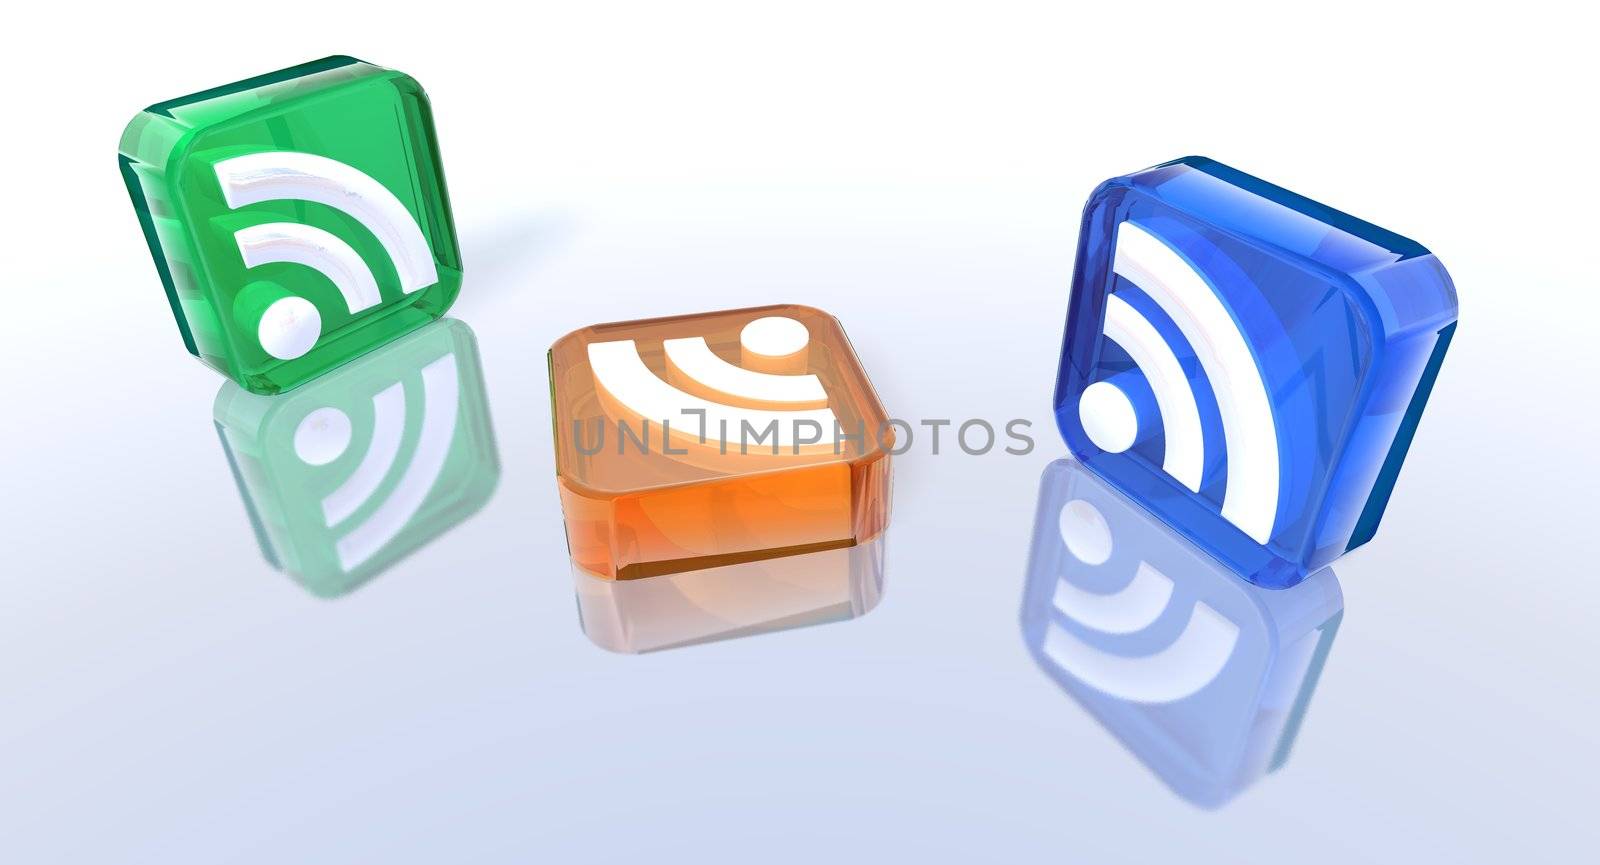 3d rendering of some colored rss symbols